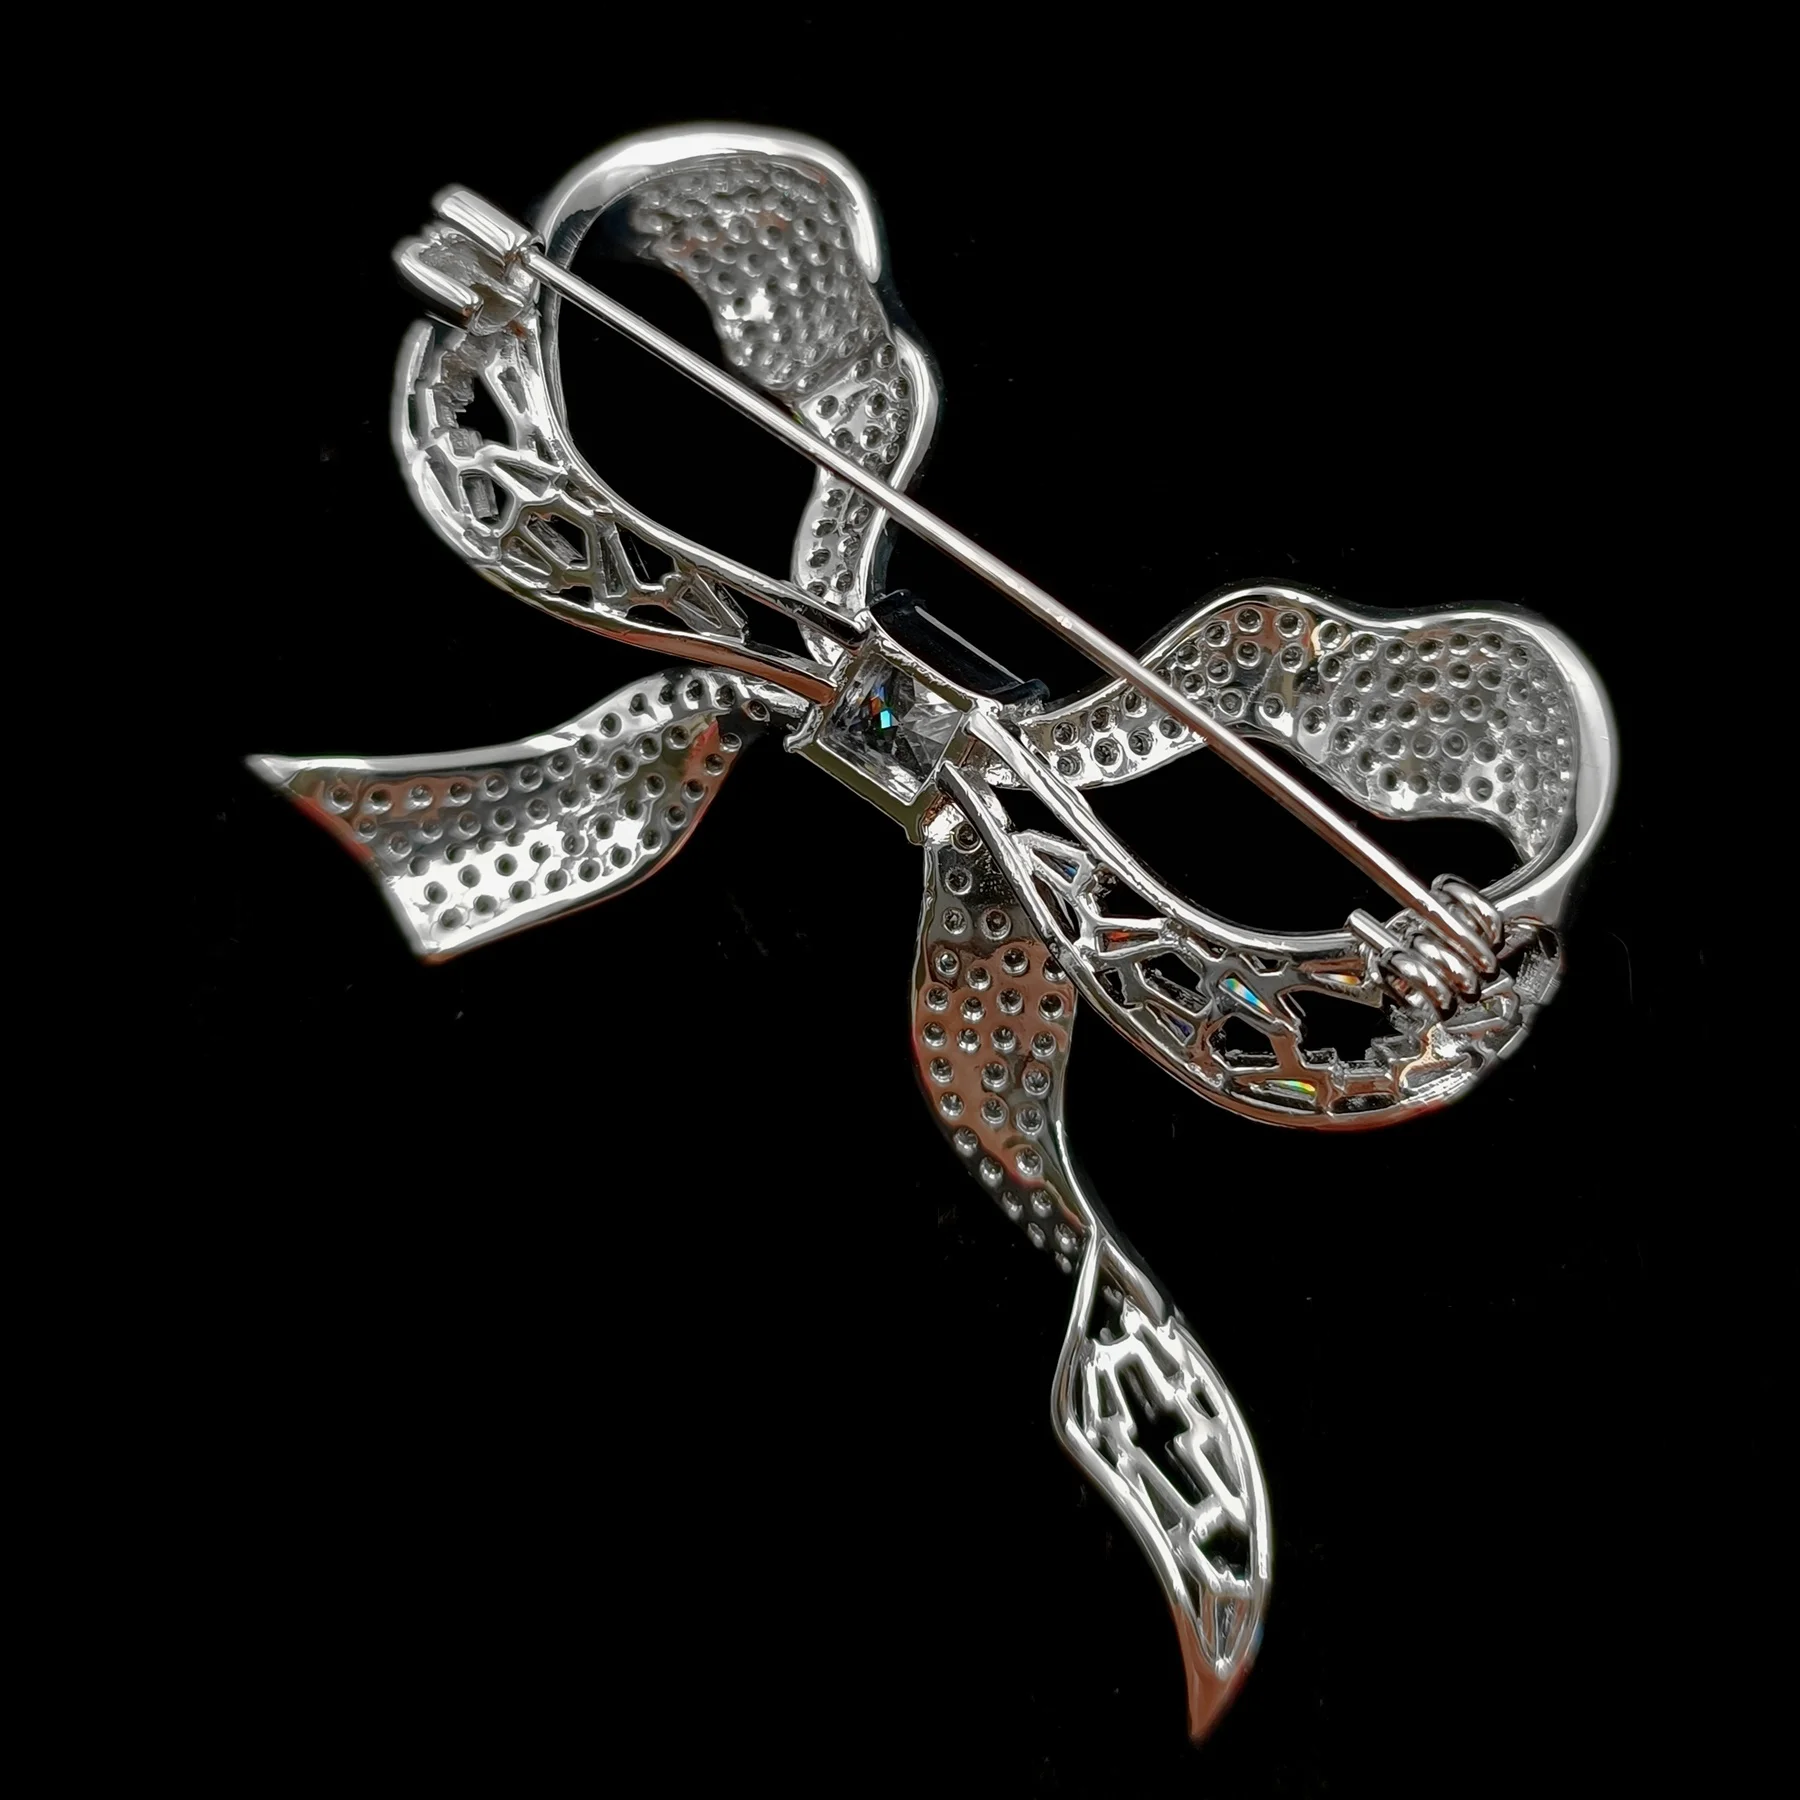 Edwardian Vintage Stylish Clear White Ribbon Bow Broach Bowtie Pin for Mothers Holiday Gifts Birthday Christmas Concert Gifts images - 6